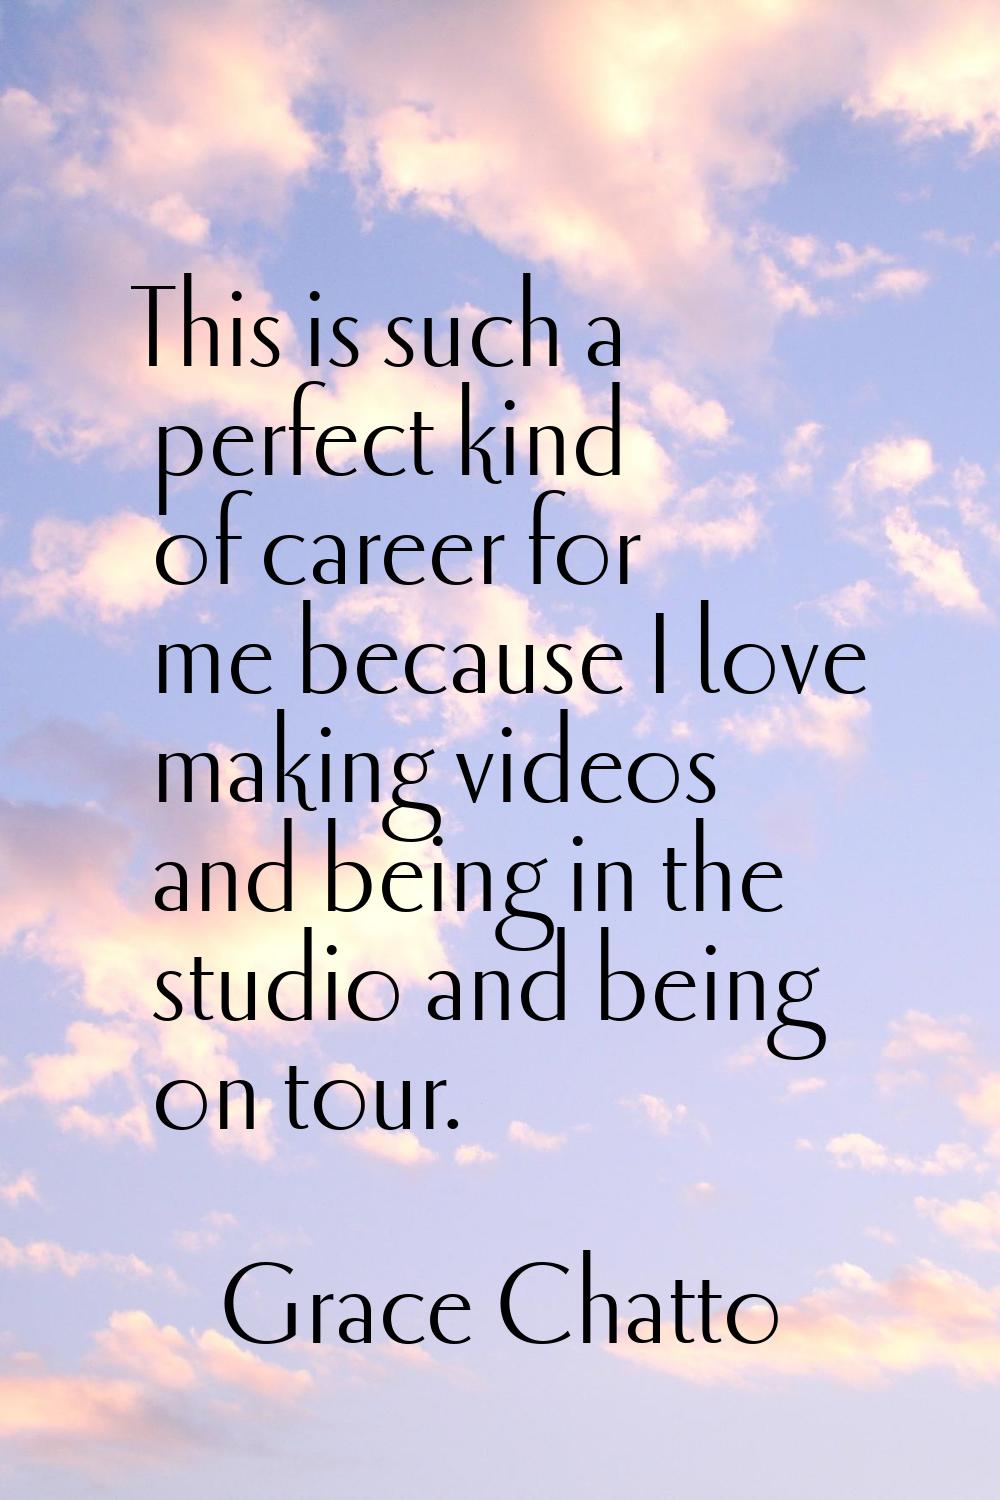 This is such a perfect kind of career for me because I love making videos and being in the studio a